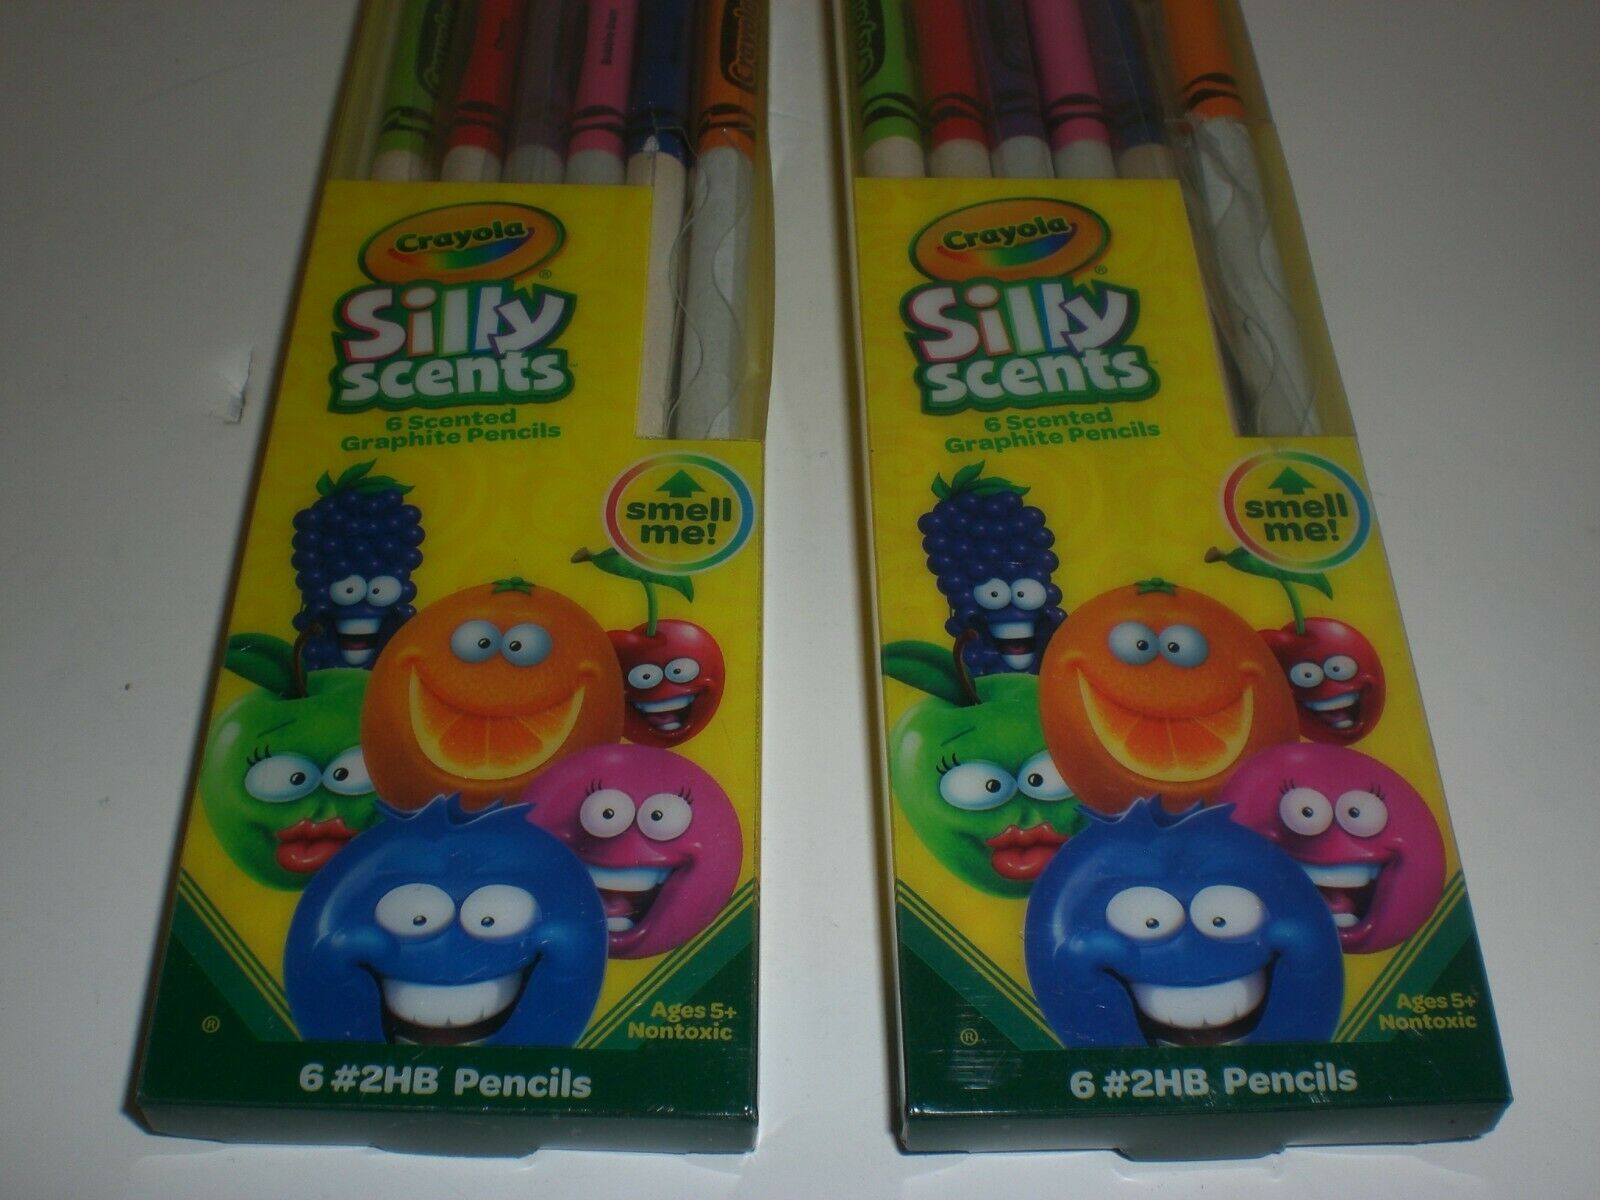 Crayola Silly Scents Graphite Pencils 2 Packs ( 12 Pencils )